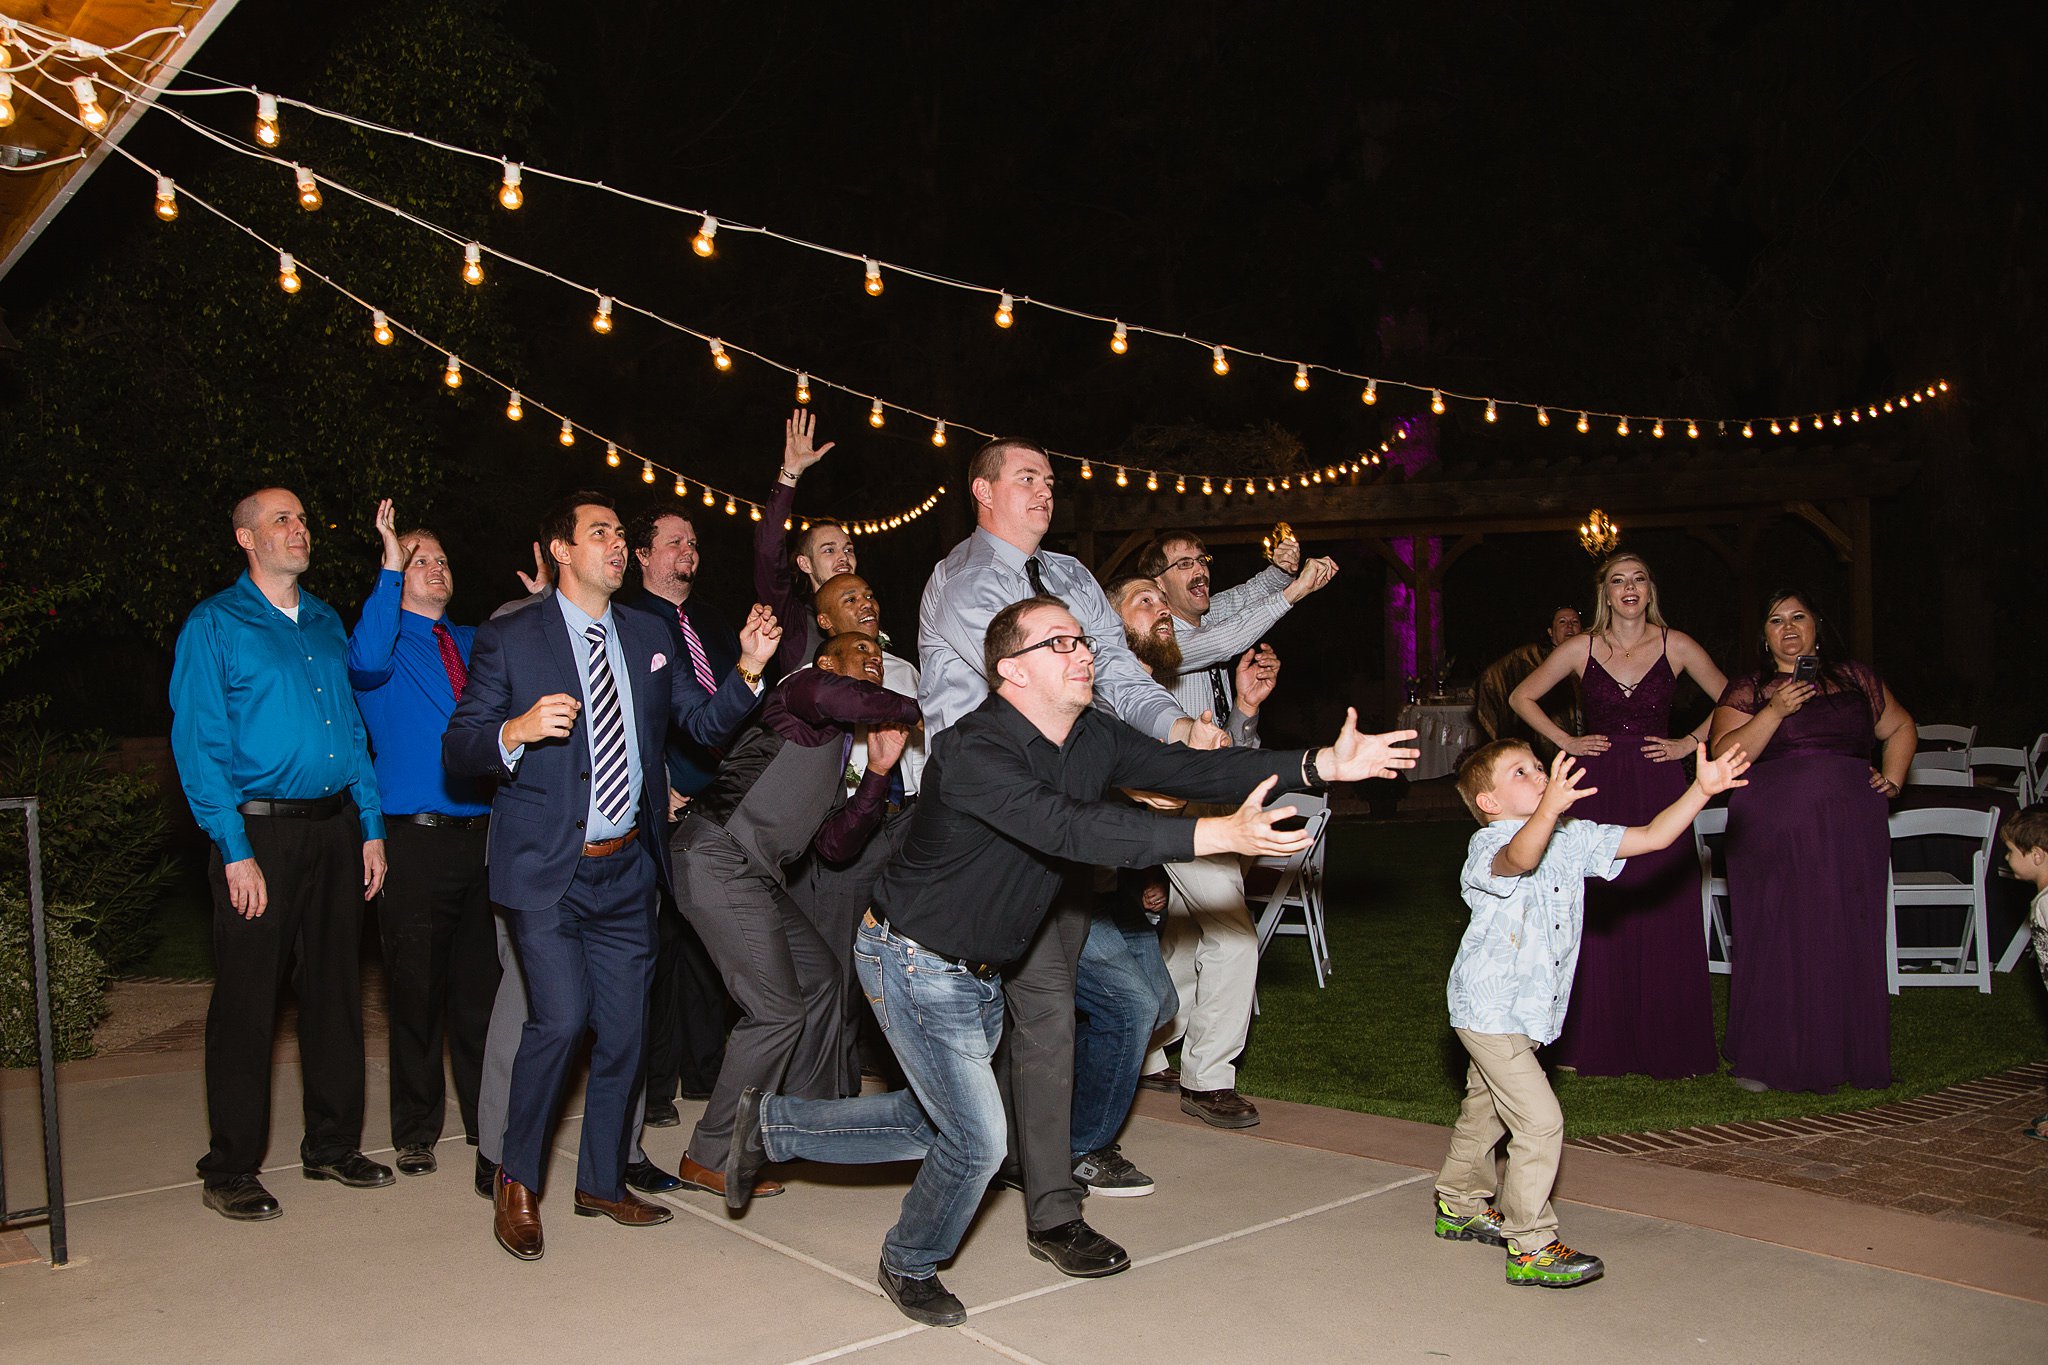 Guests catching garter at wedding reception by wedding photographer PMA Photography.